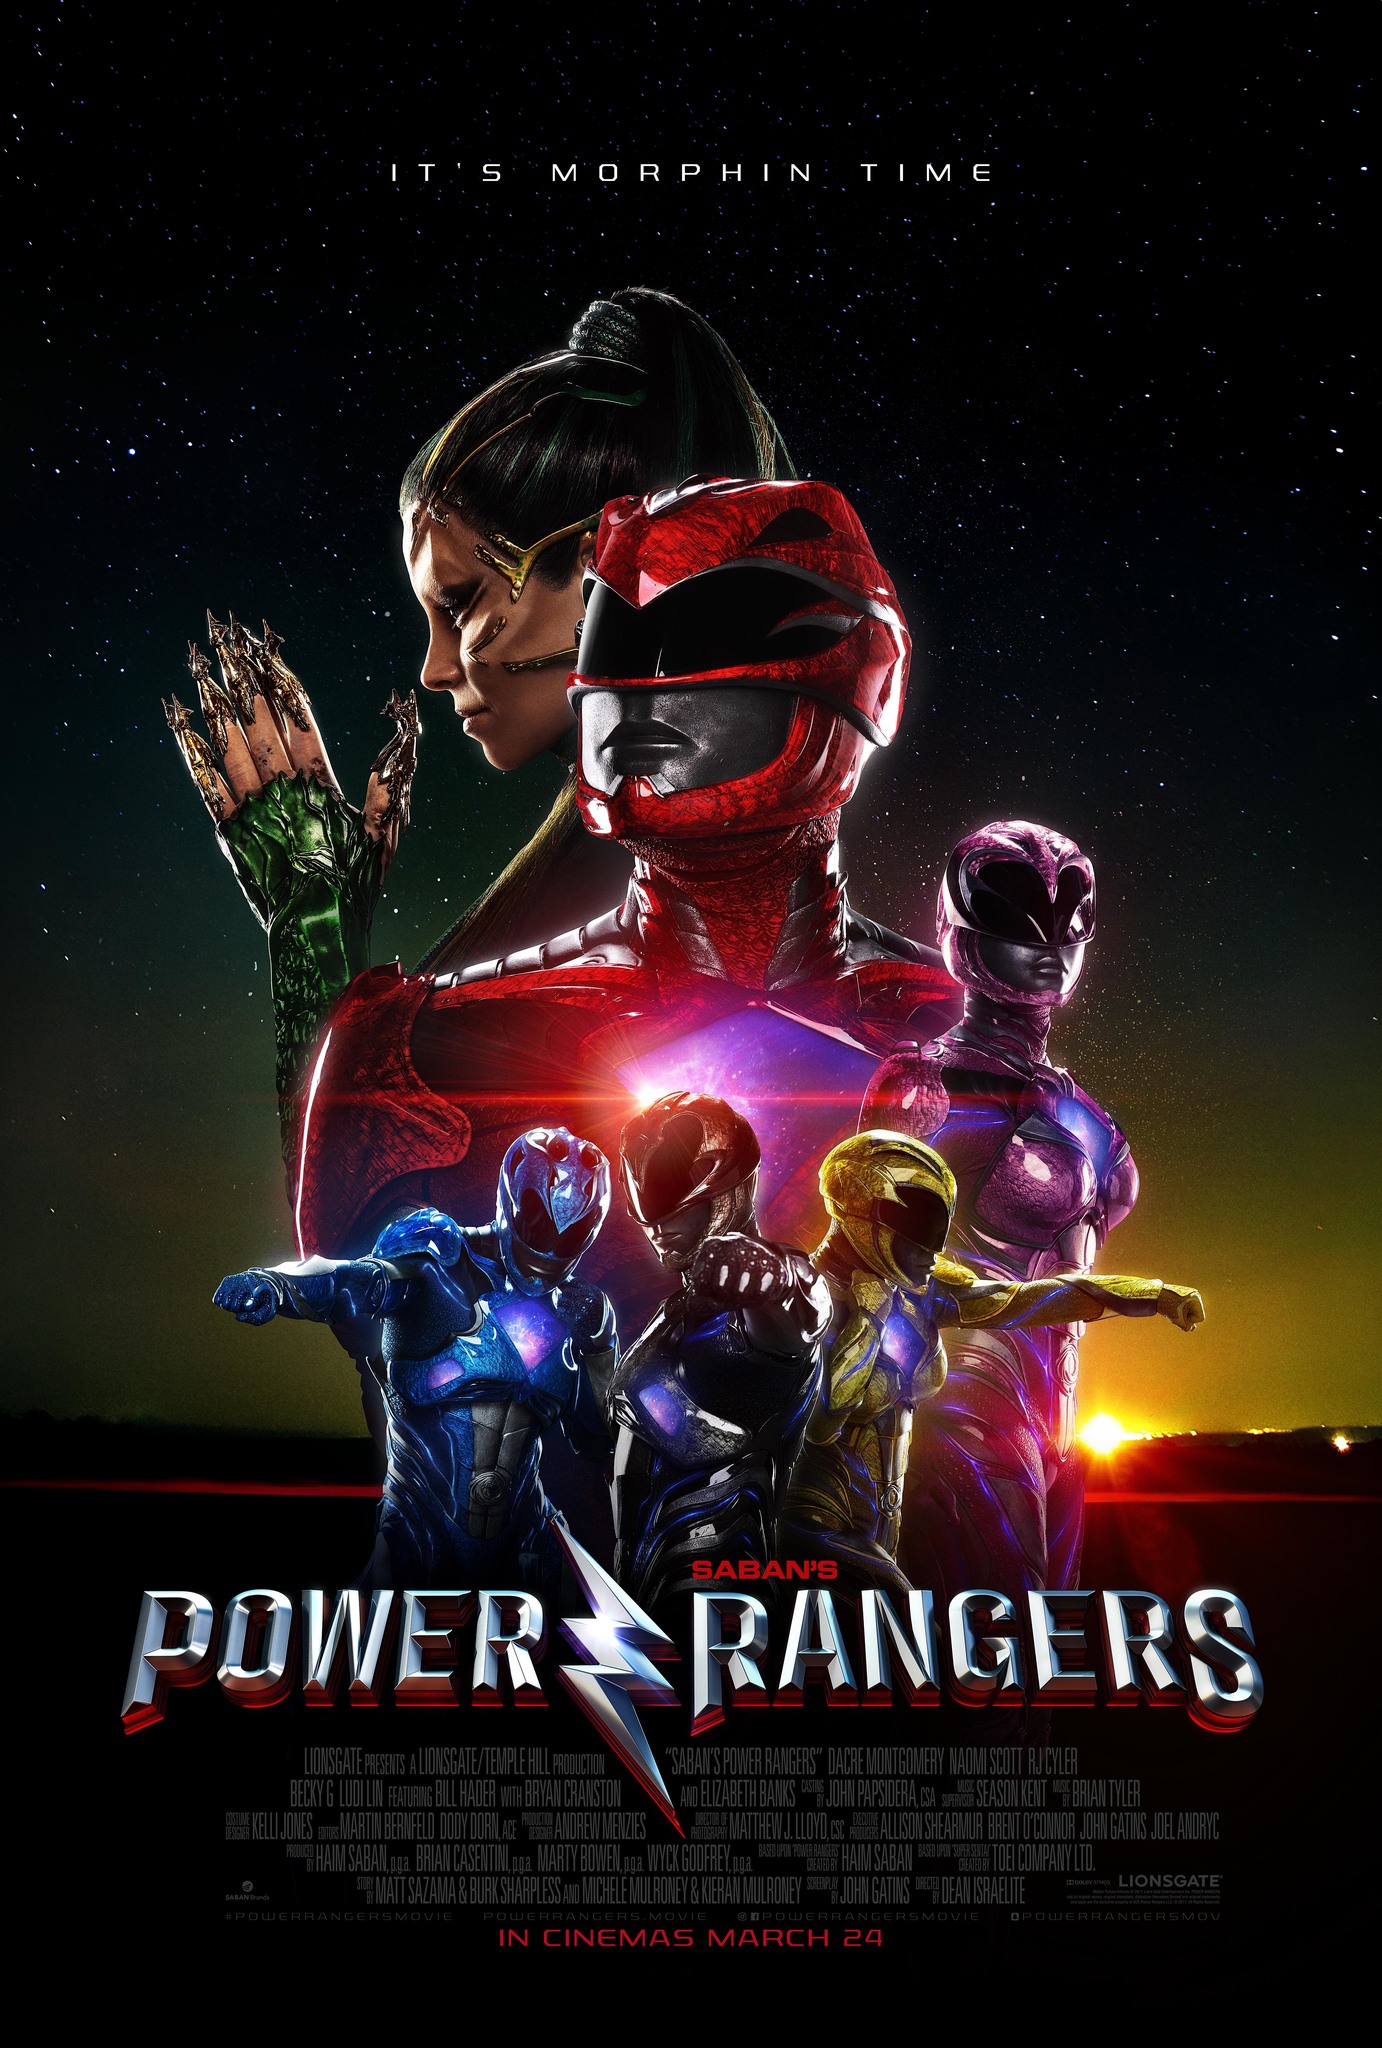 beth hiller recommends Power Rangers Sex Movie